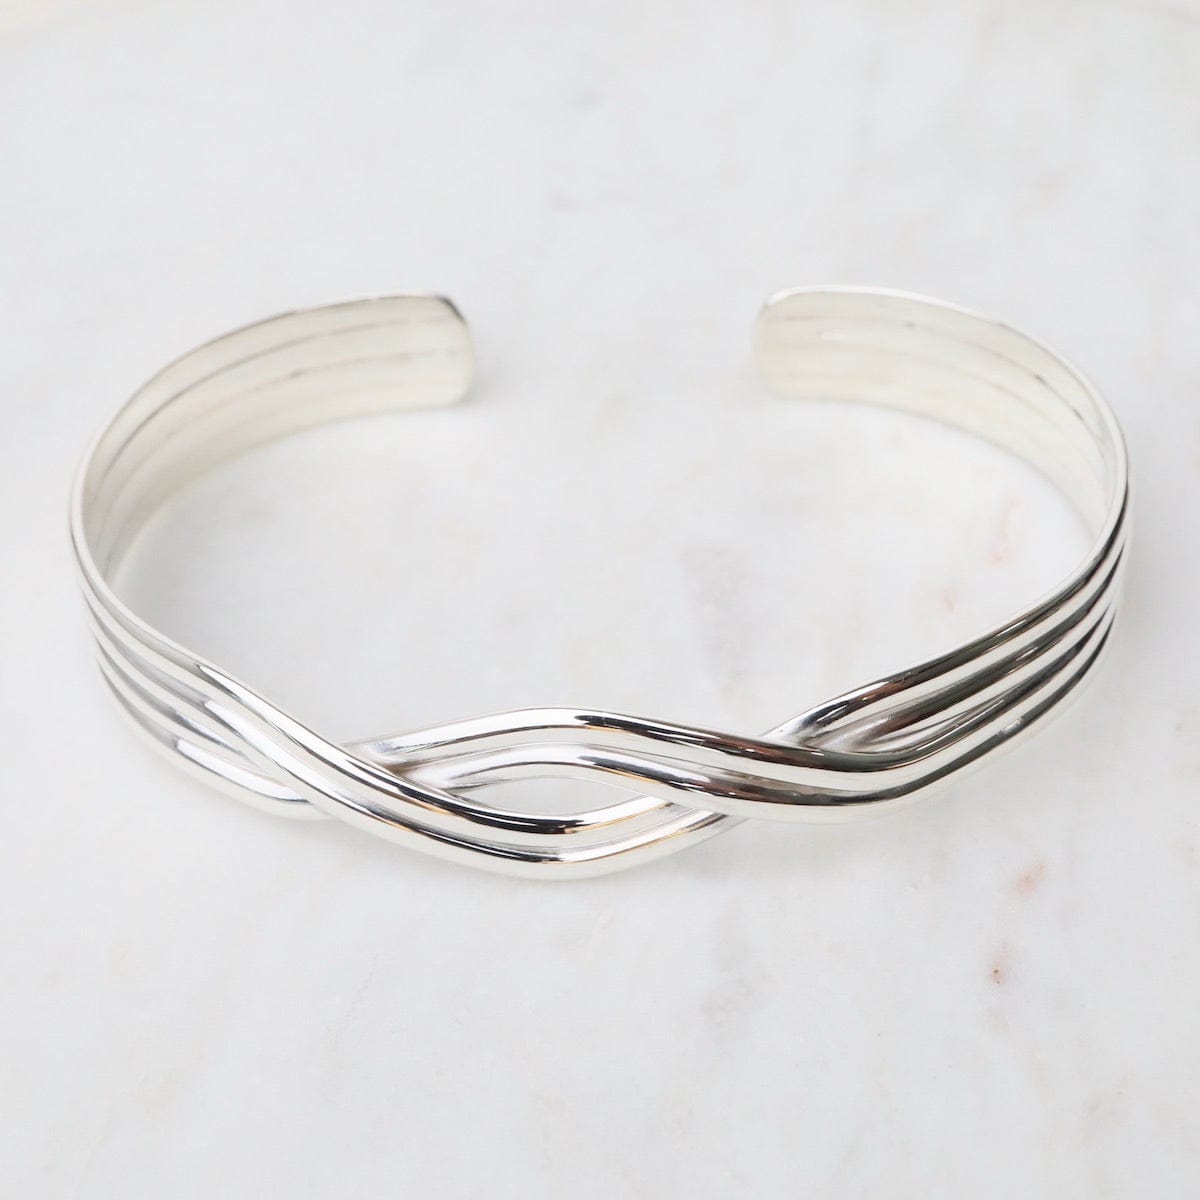 BRC 1/2" 4 Strand Overlapping Sterling Silver Cuff